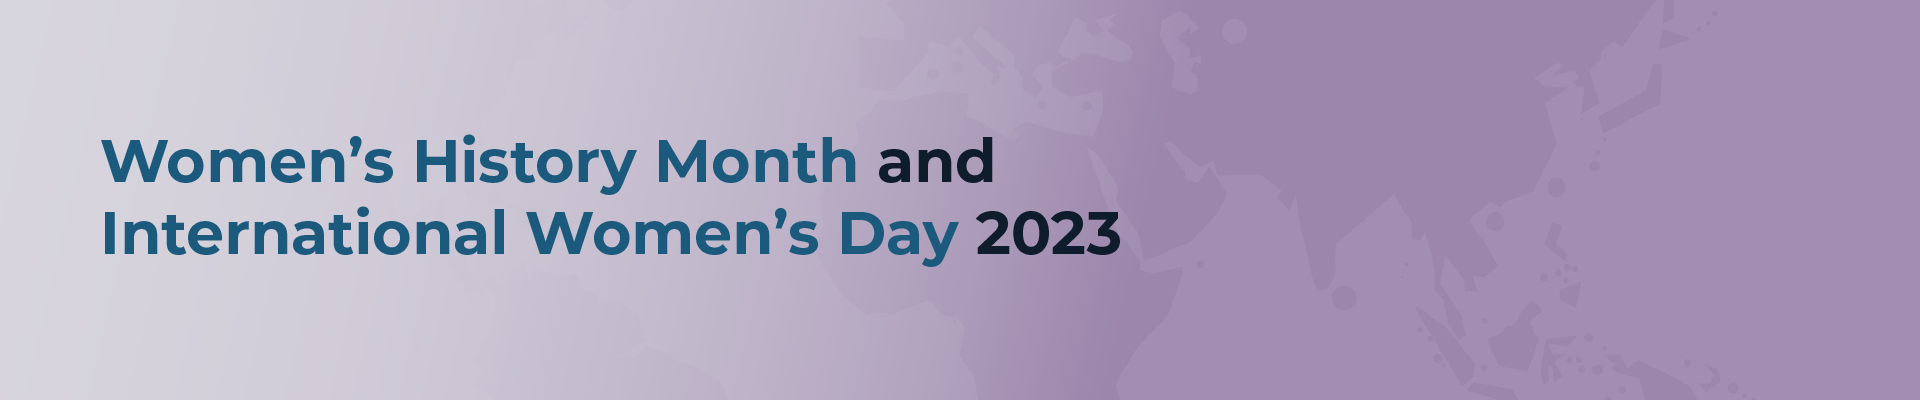 Women's History Month and International Women's Day 2023